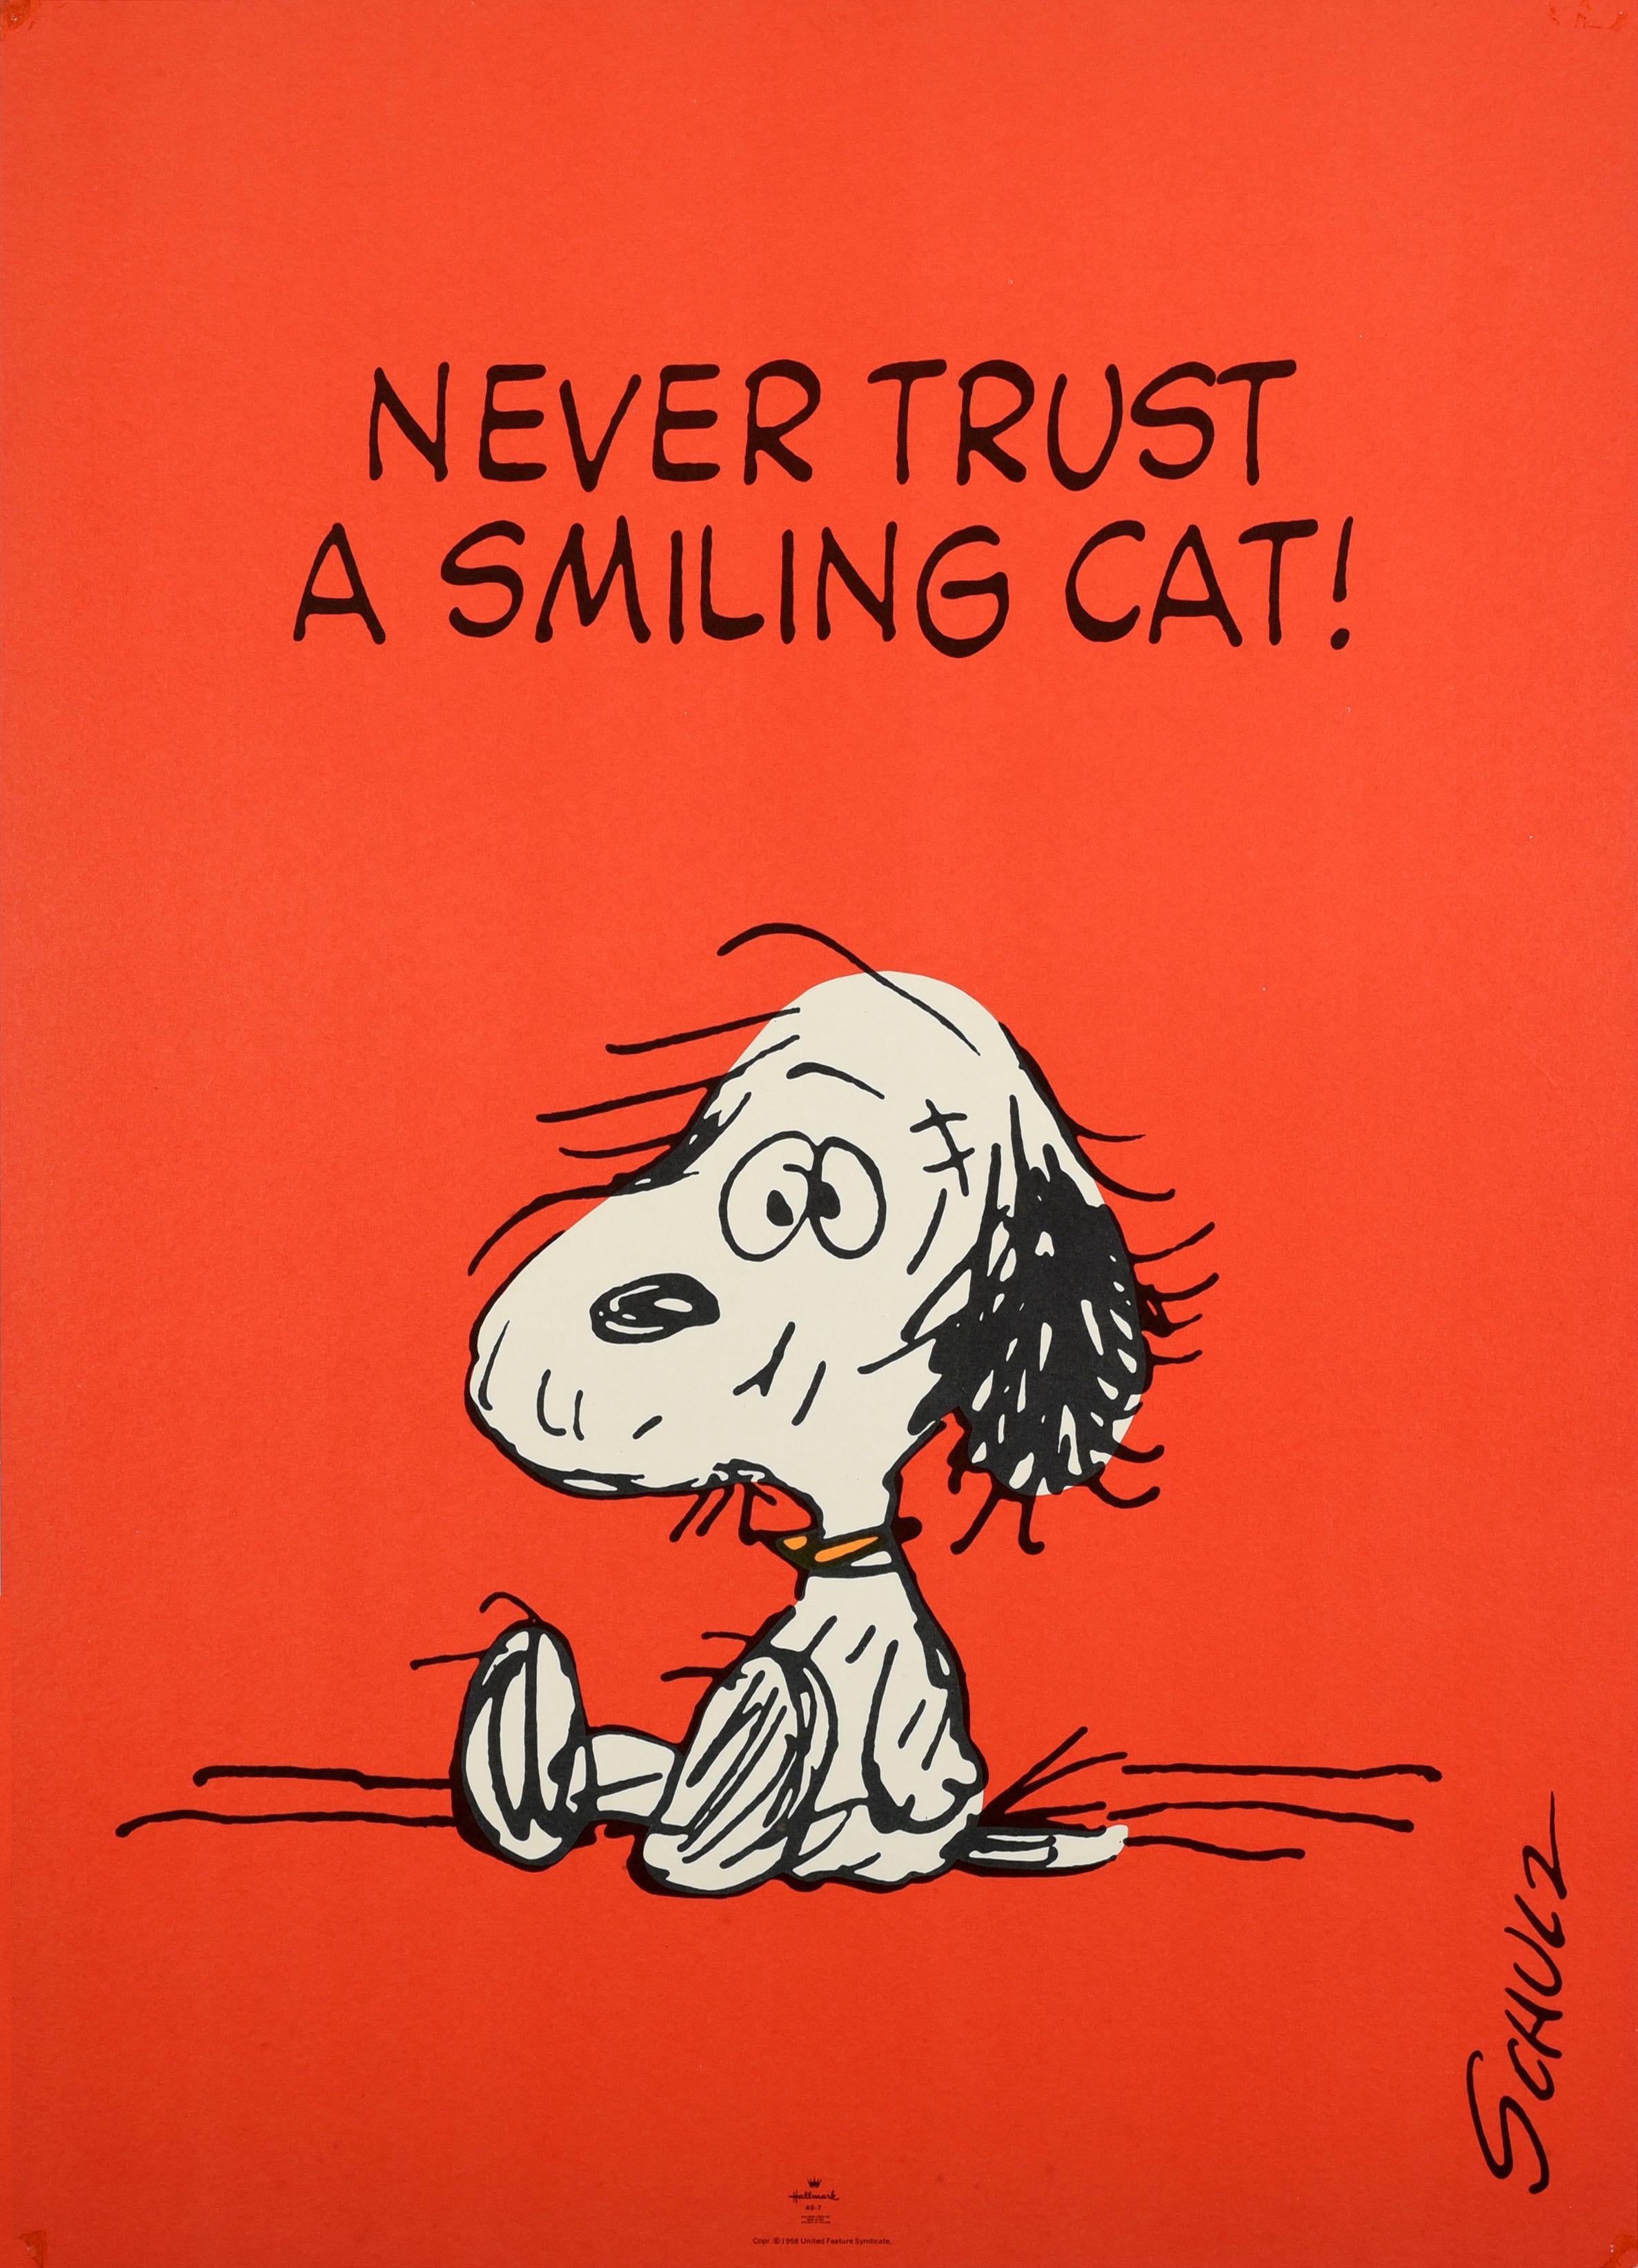 Charles M. Schulz Print - Original Vintage Poster Never Trust A Smiling Cat Snoopy Dog Quote Cartoon Art